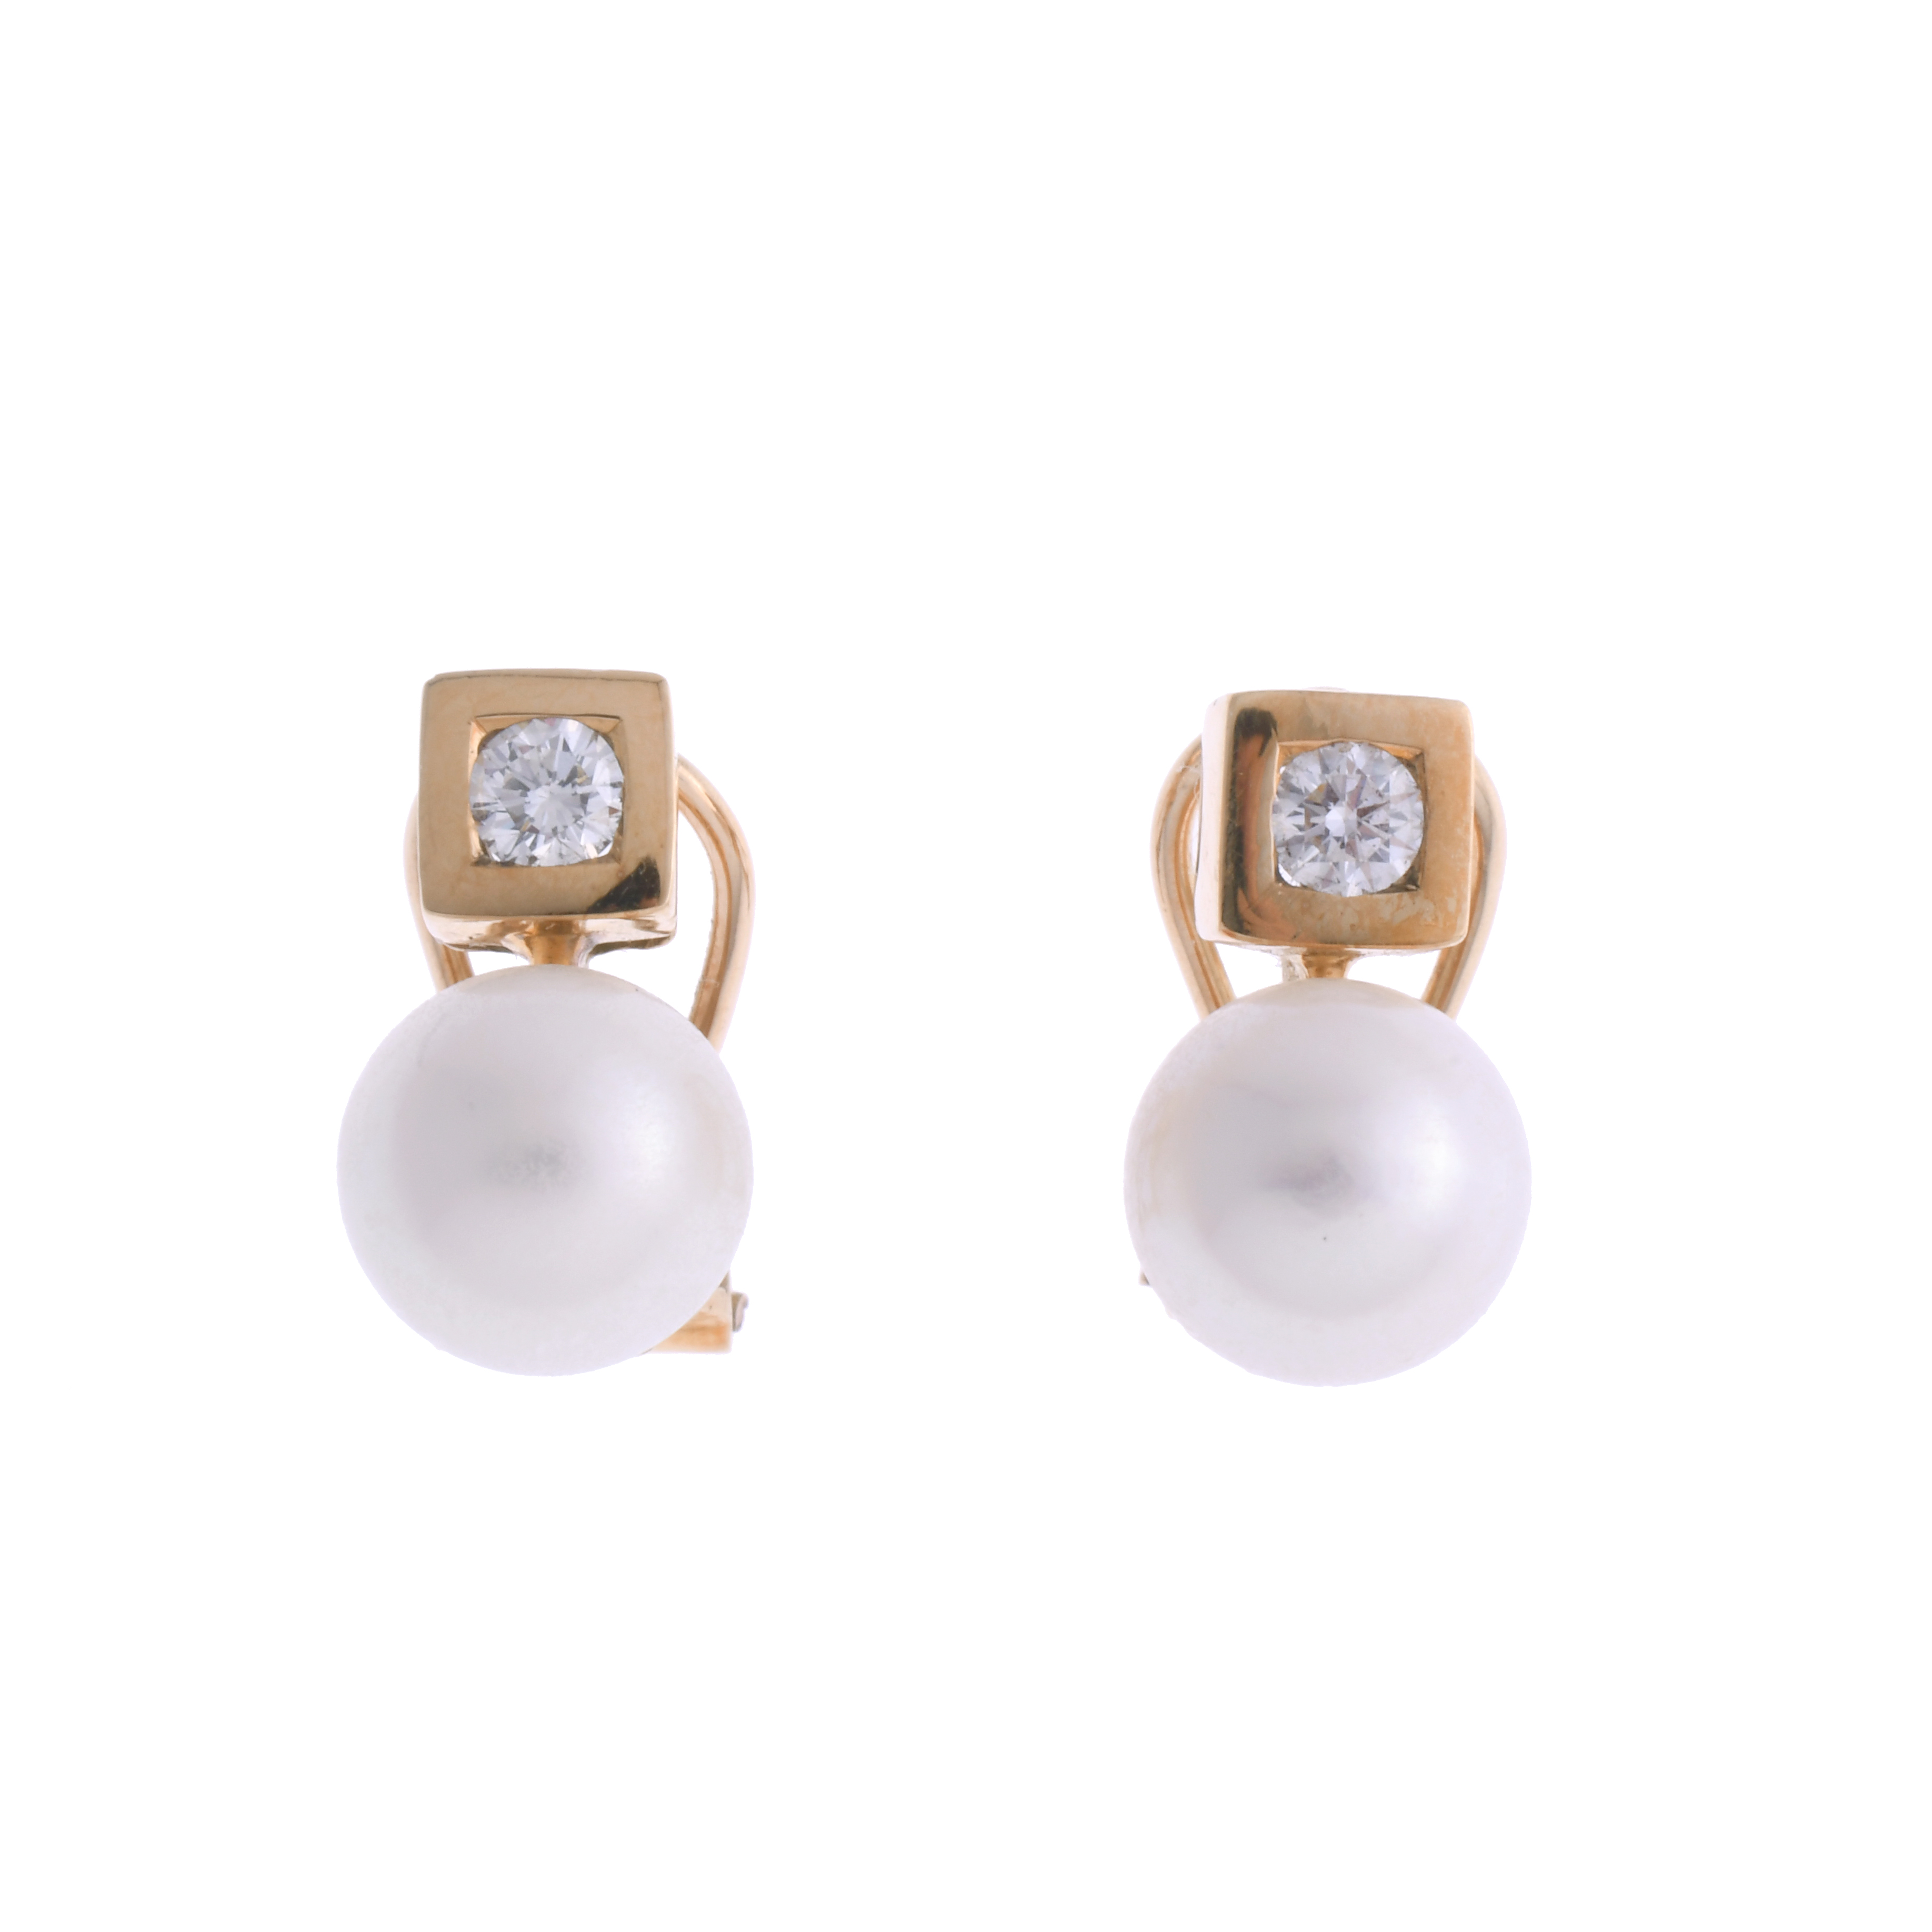 YOU AND ME EARRINGS WITH DIAMOND AND PEARL.